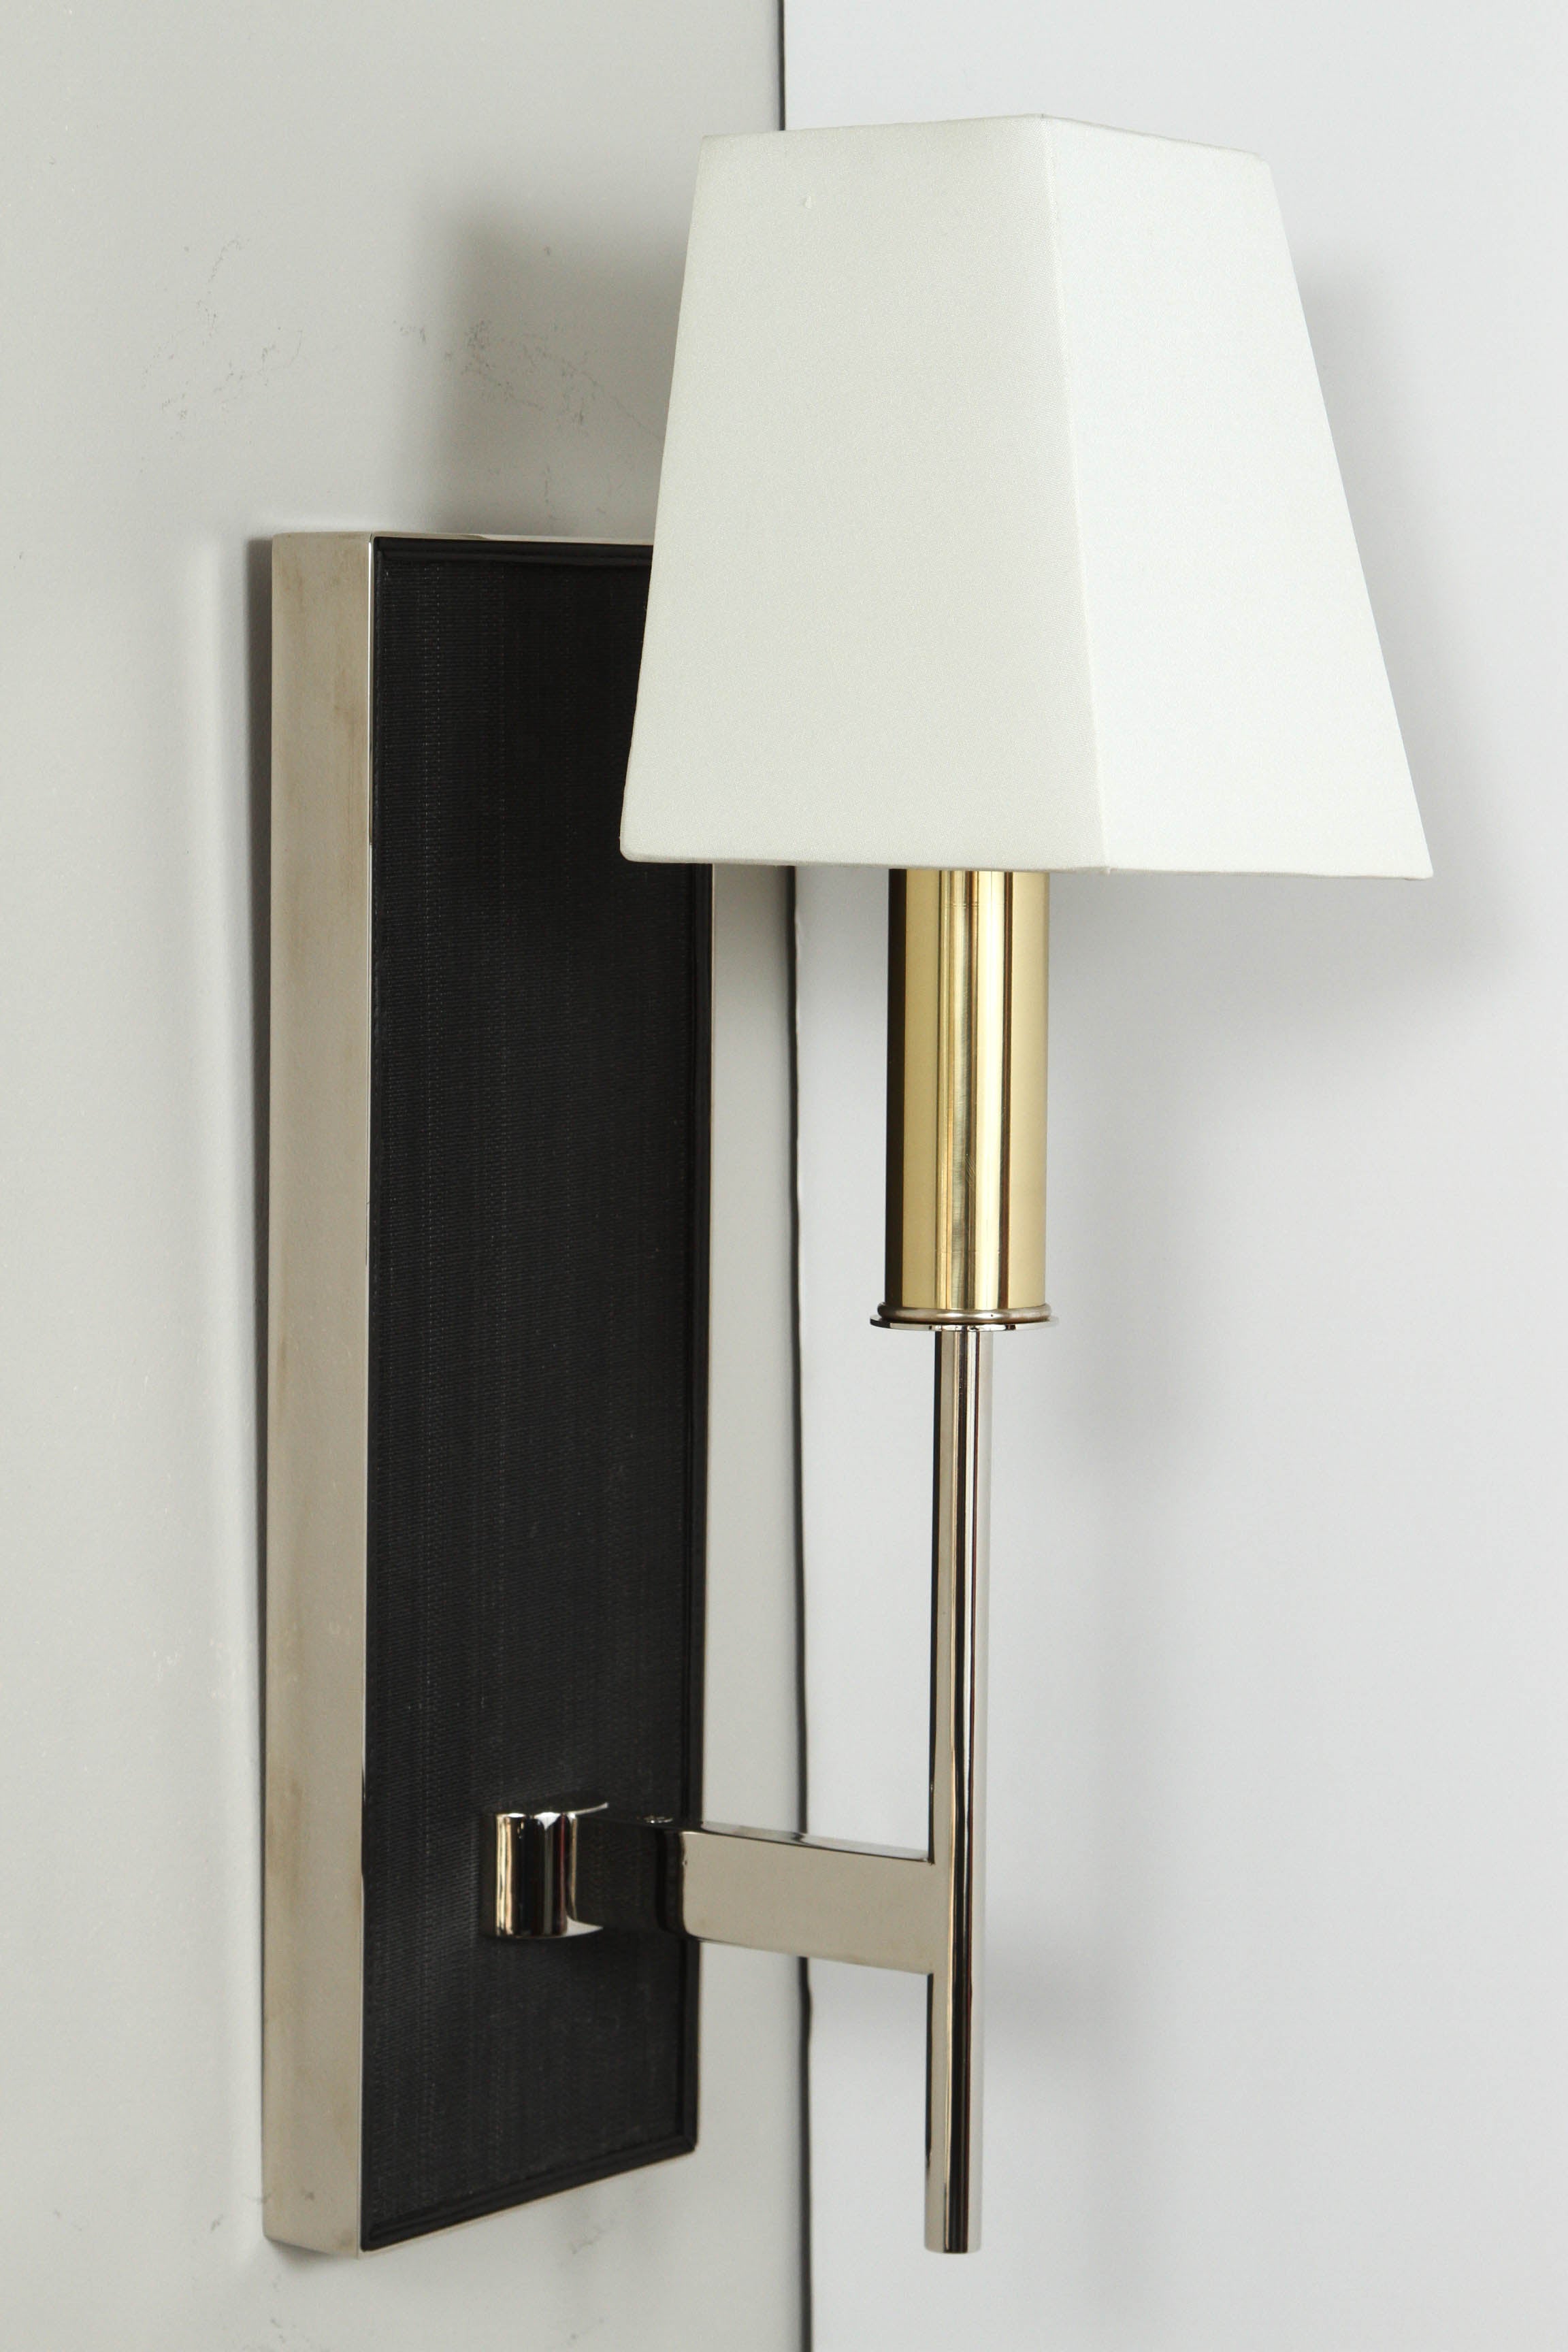 Paul Marra One-Arm Horsehair Sconce with graphite colored horsehair, leather trim, brass candle cover, custom shield silk shade, polish nickel finish. By order. Production lead approximately 8-10 weeks. Overall Height: is 18